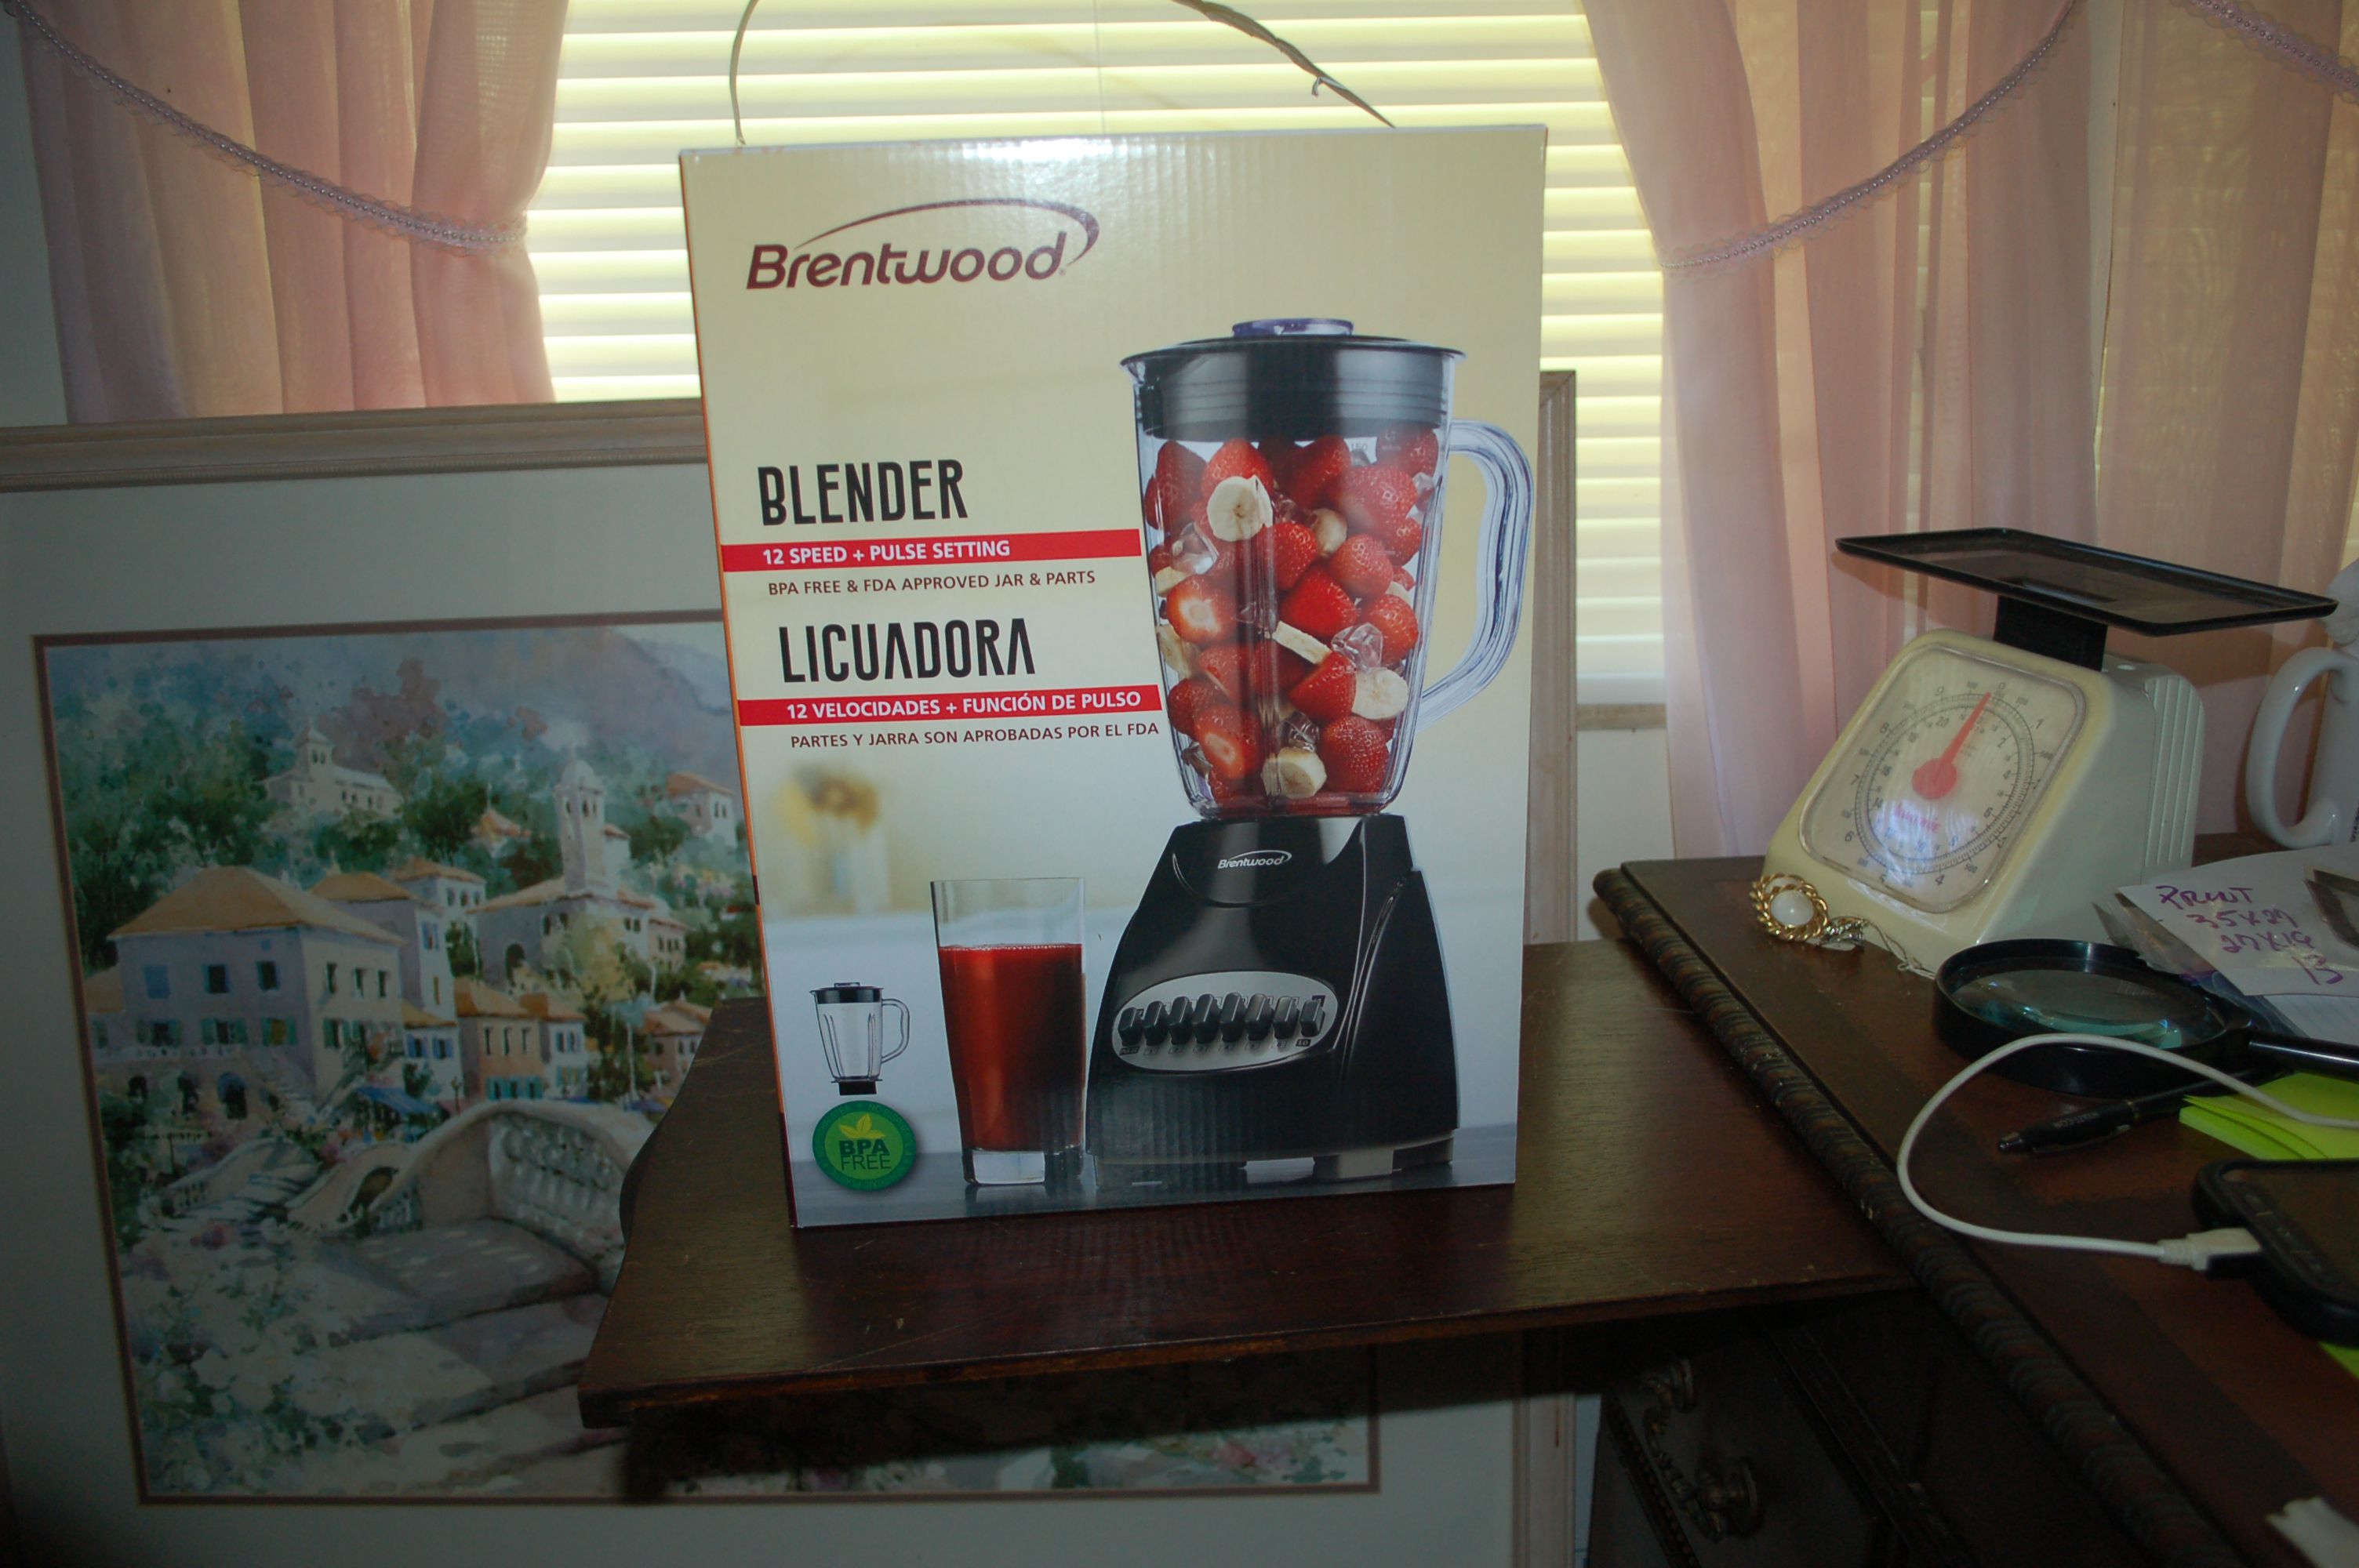 BRENTWOOD 12 SPEED BLENDER, NEW IN BOX. 12 SPEED + PULSE SETTING.